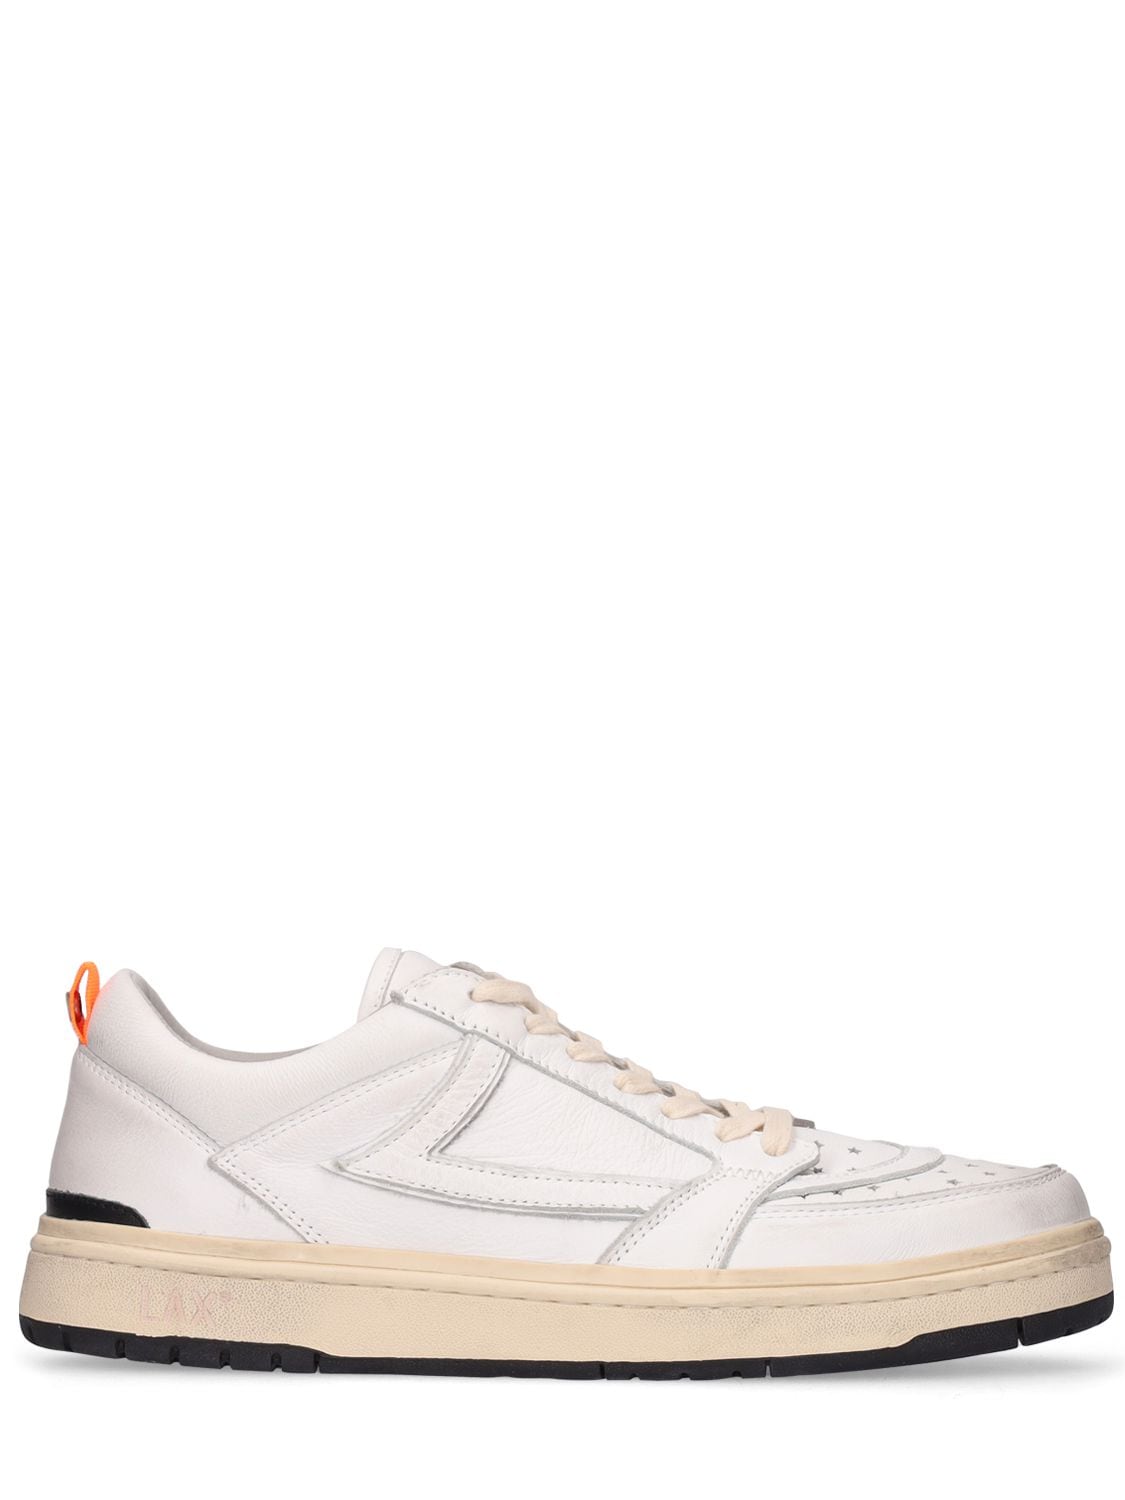 HTC LOS ANGELES Starlight Leather Low Top Sneakers